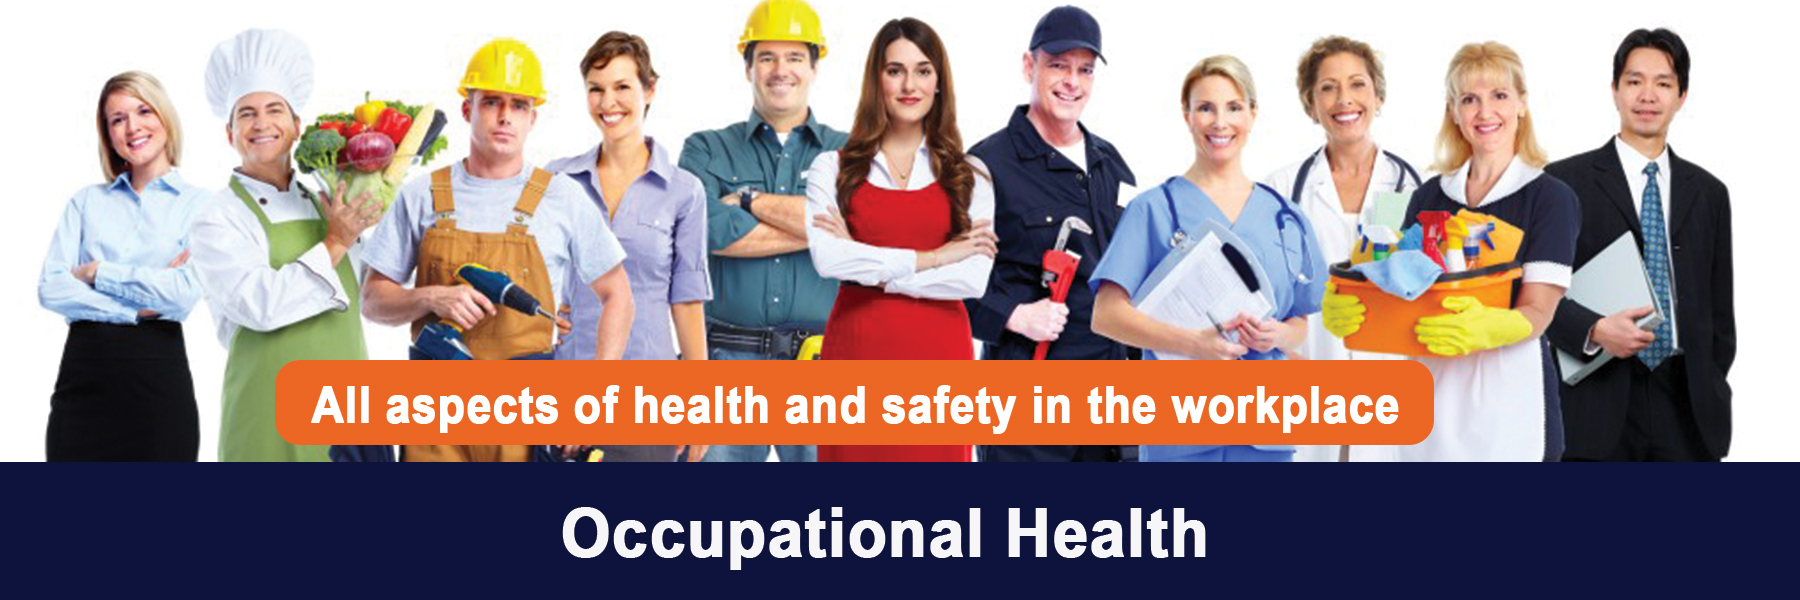 PRACTICE OCCUPATIONAL HEALTH AND SAFETY PROCEDURES